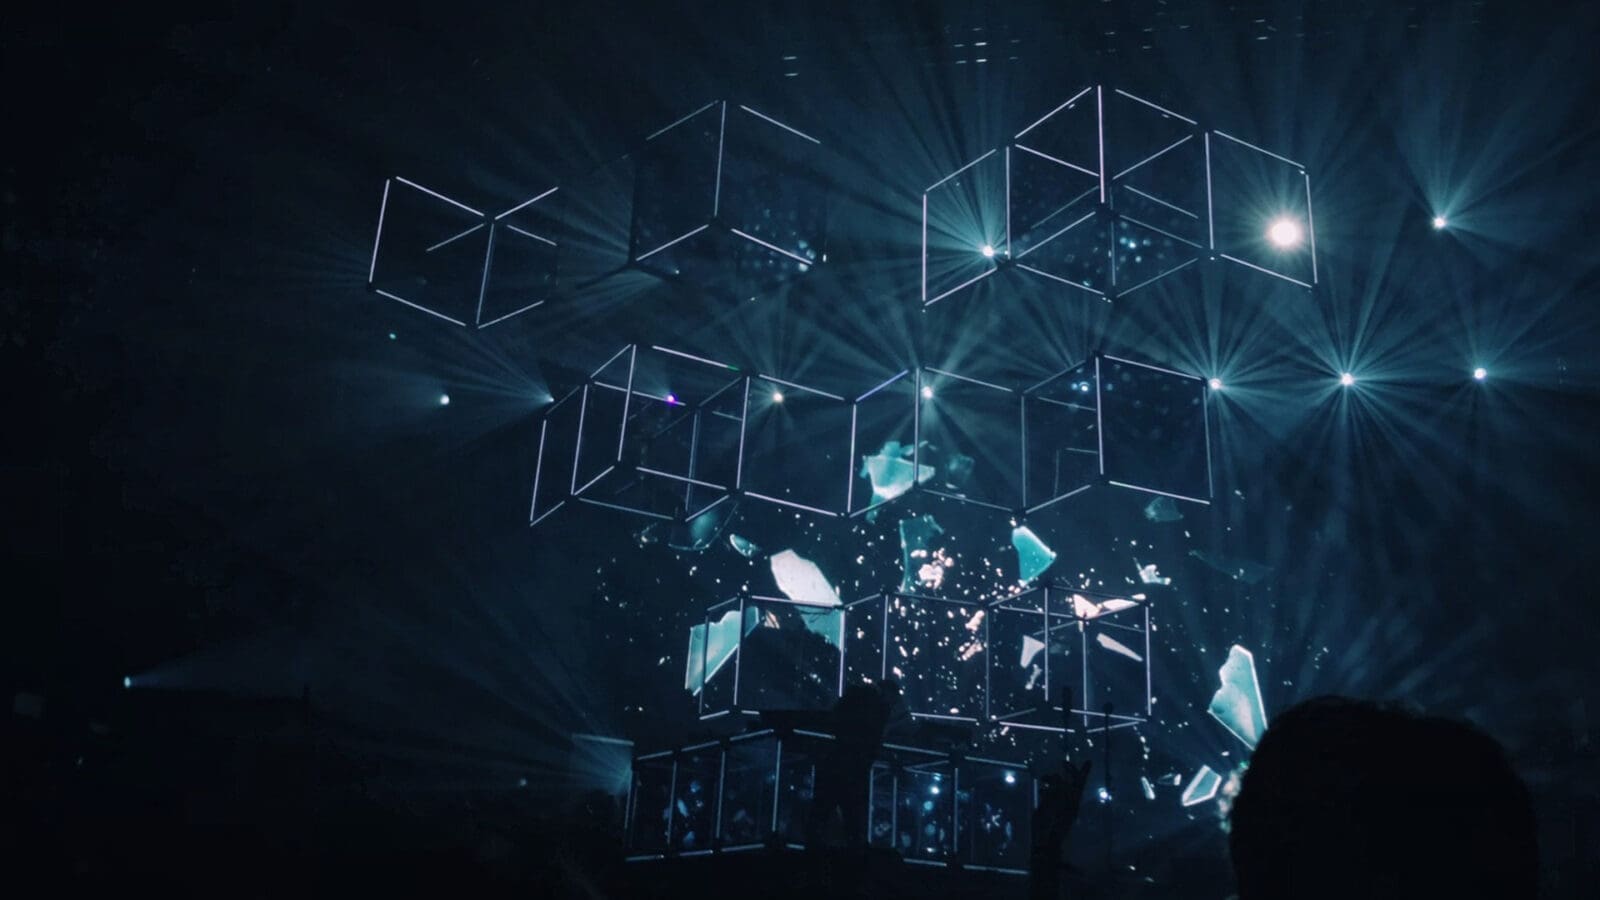 cubes created by lines and light effects create a ambiance resembling the technology world